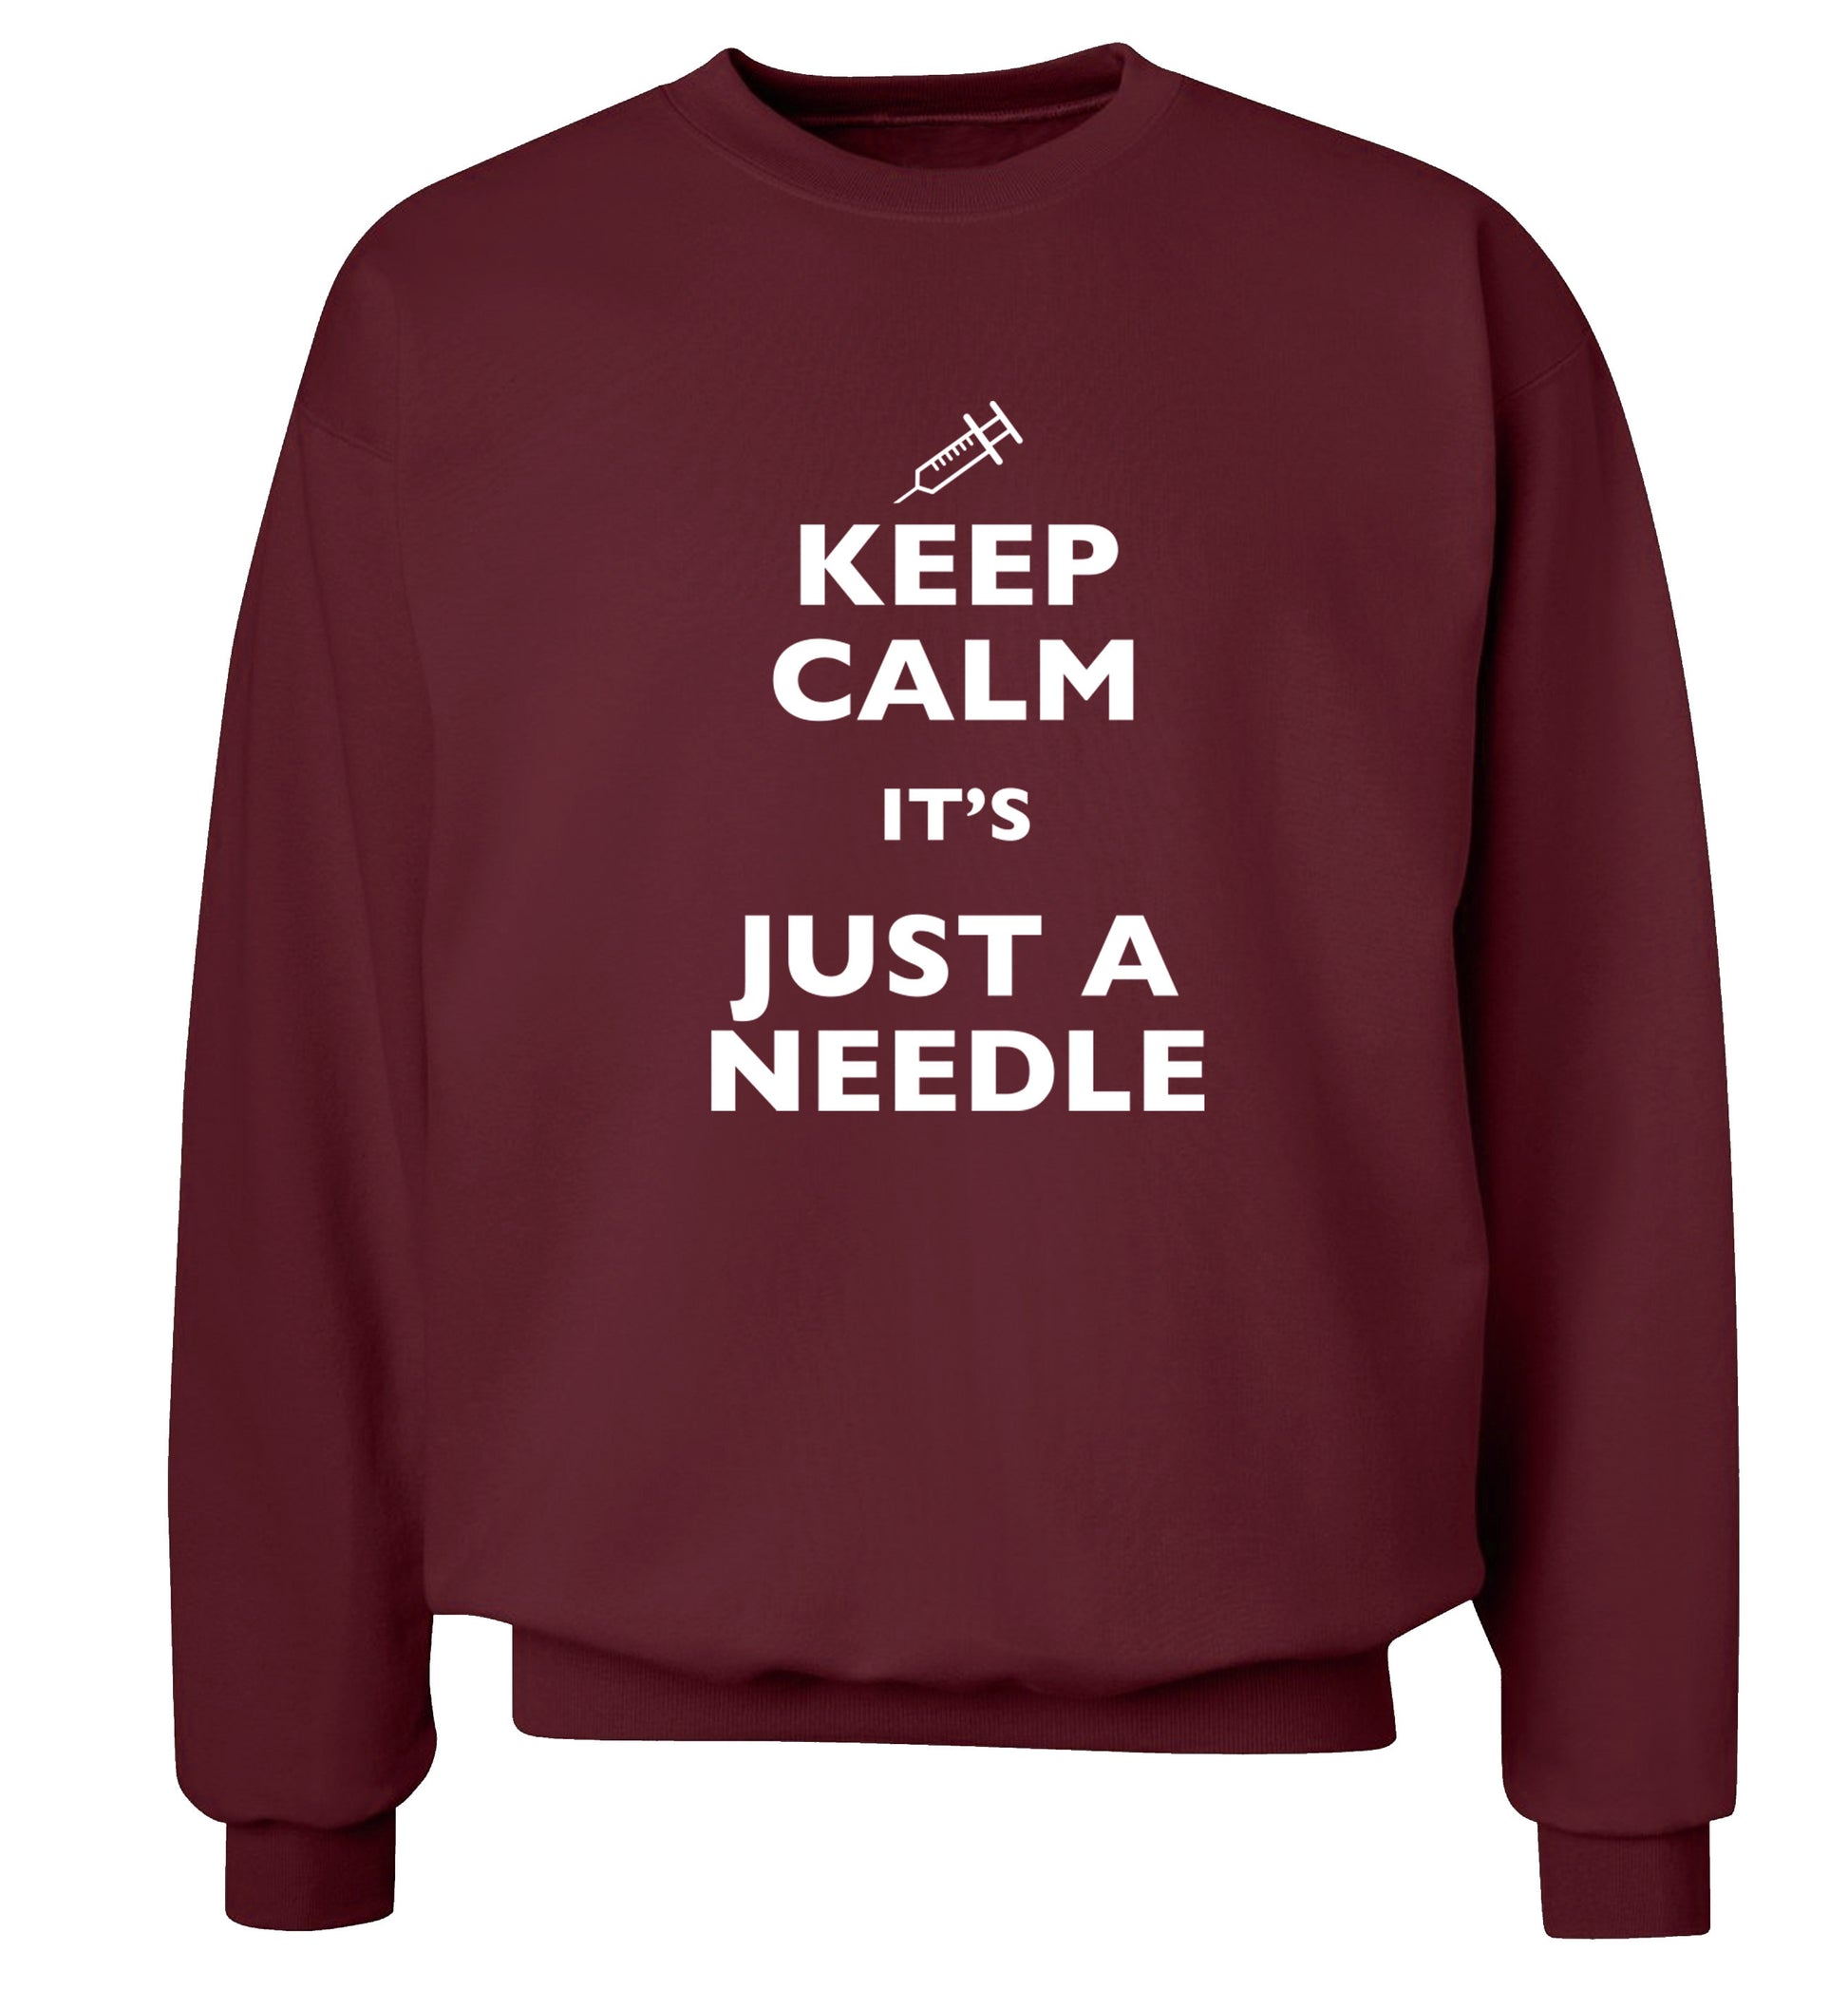 Keep calm it's only a needle Adult's unisex maroon Sweater 2XL